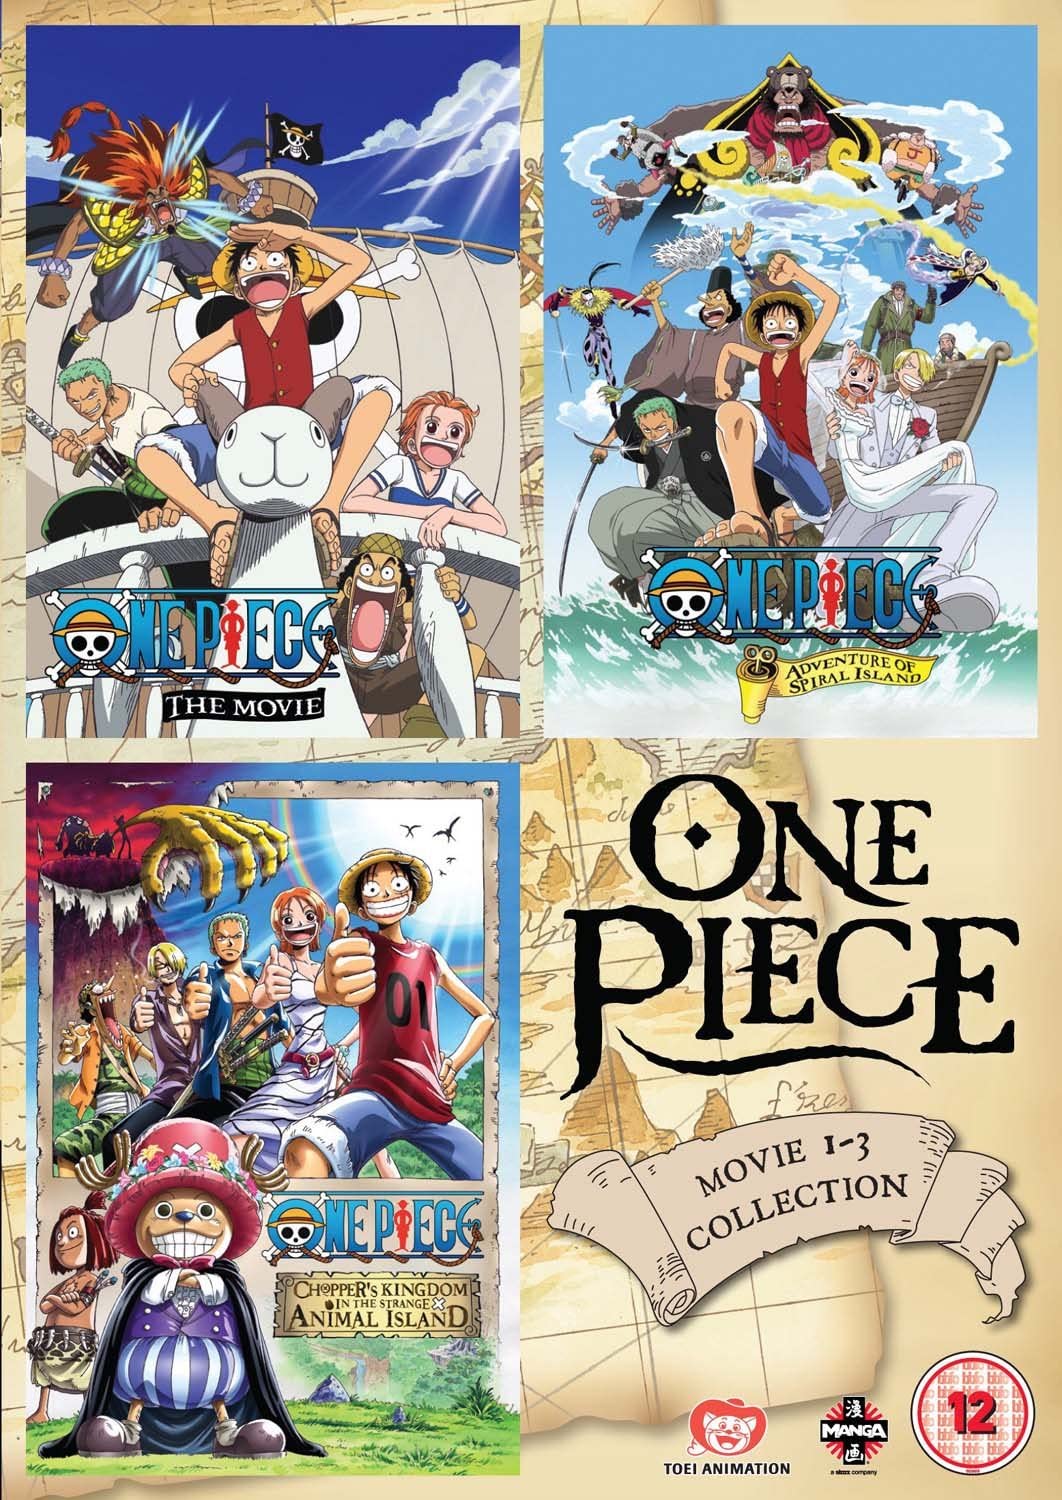 One Piece Movie Collection 1 (Contains Films 1-3) [DVD]